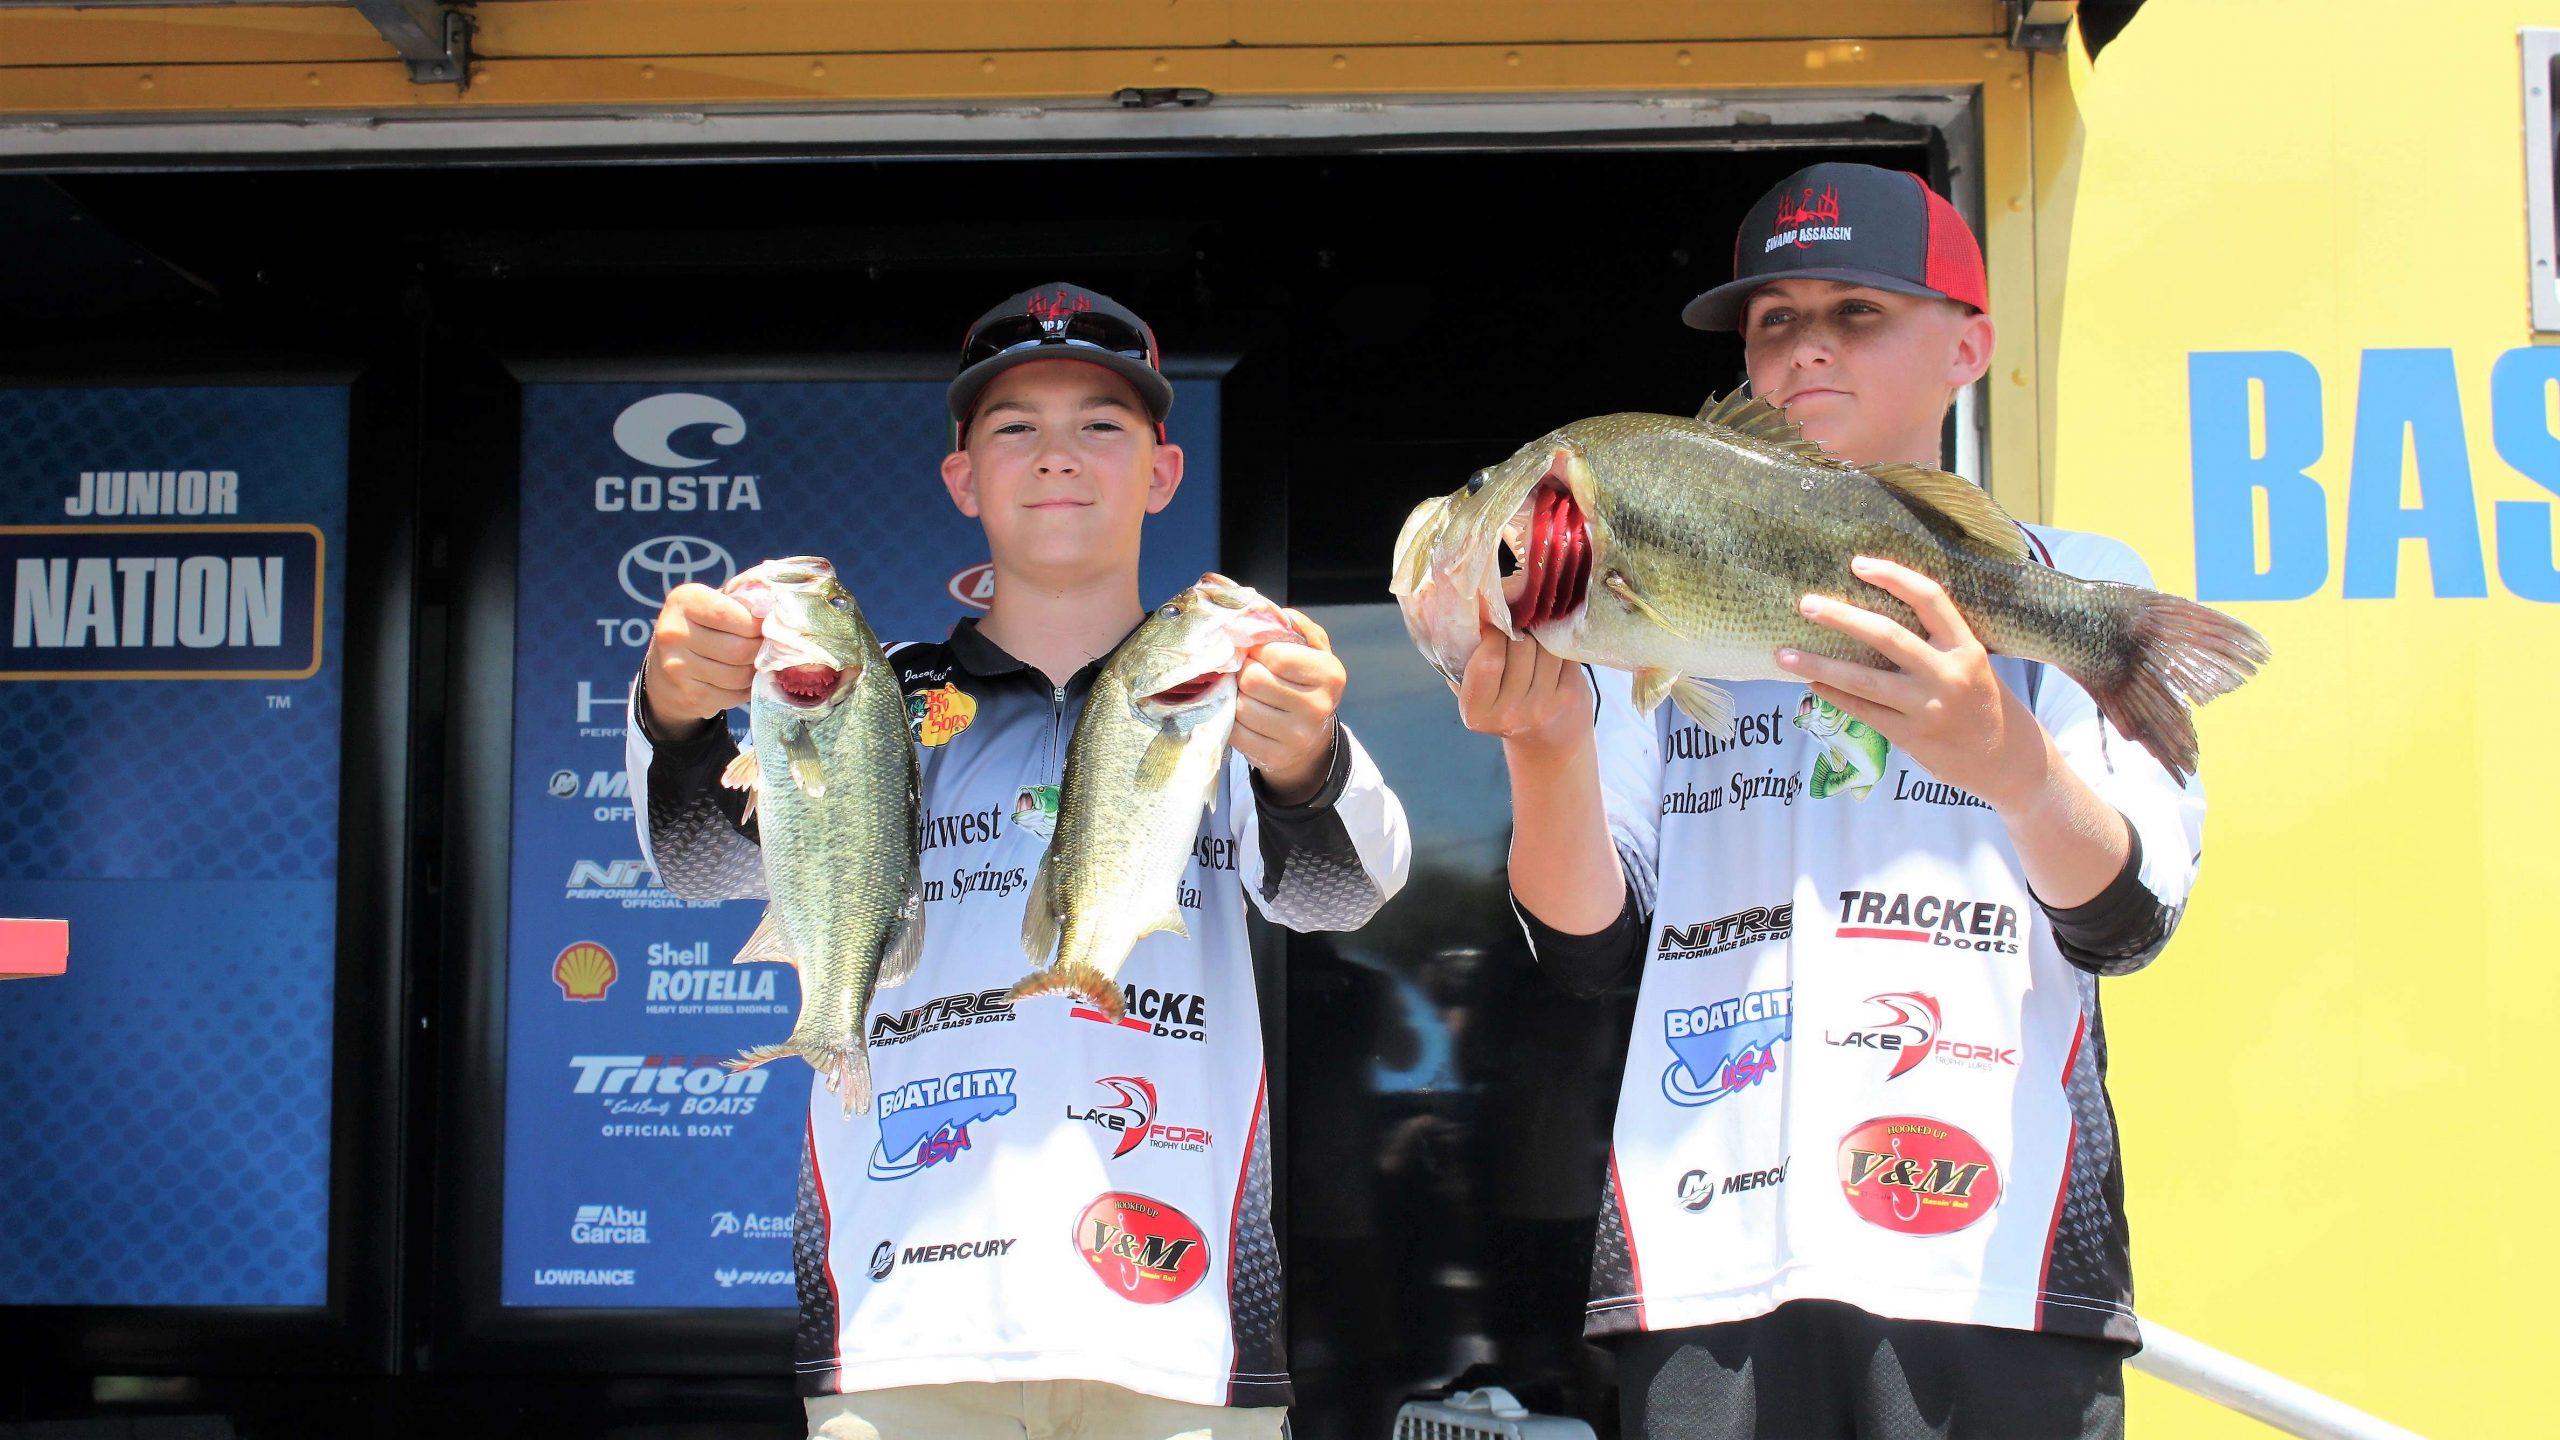 Here comes the second biggest bag of the day. It was weighed by the Louisiana duo of Jordan Sylvester and Jacob Tullier who had a limit that weighed 15-1. Along with Golubjatnikov, they were the only other team that weighed in a double-digit bag on Day 1. The big bass of the bag weighed 5-7.
